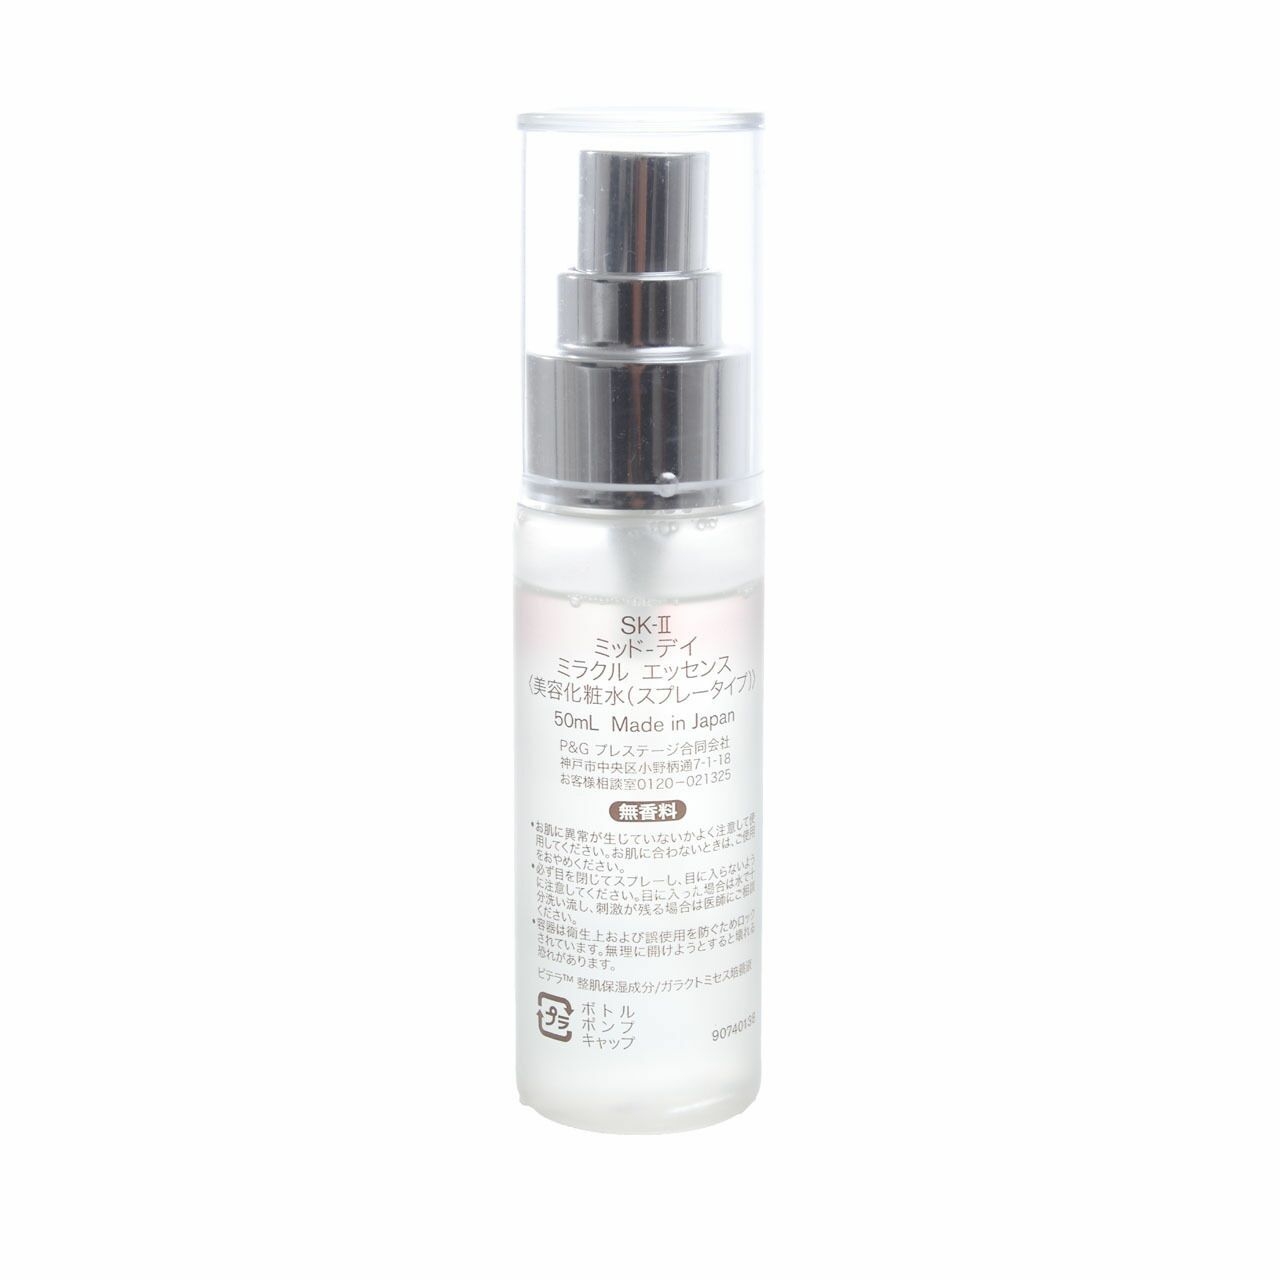 SK-II Mid-Day Miracle Essence Pitera Skin Care